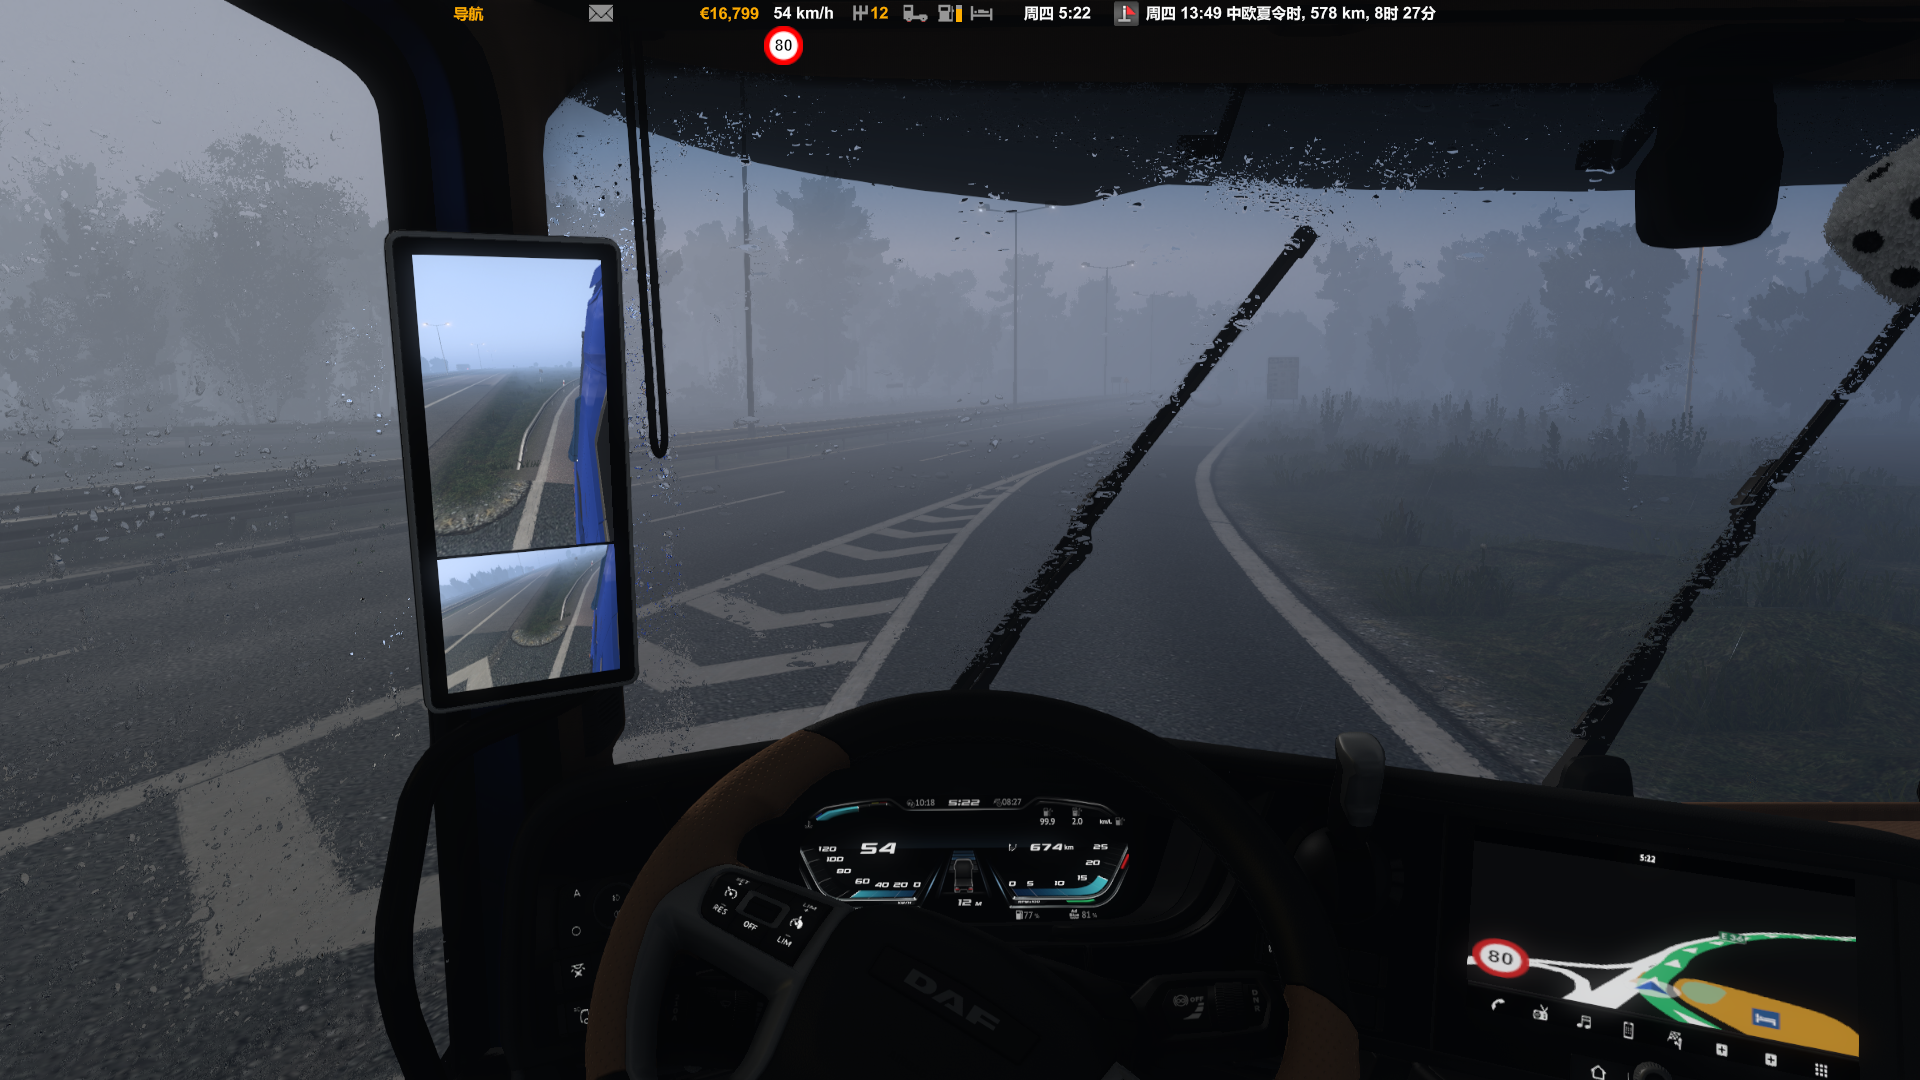 ets2_20230620_234950_00.png